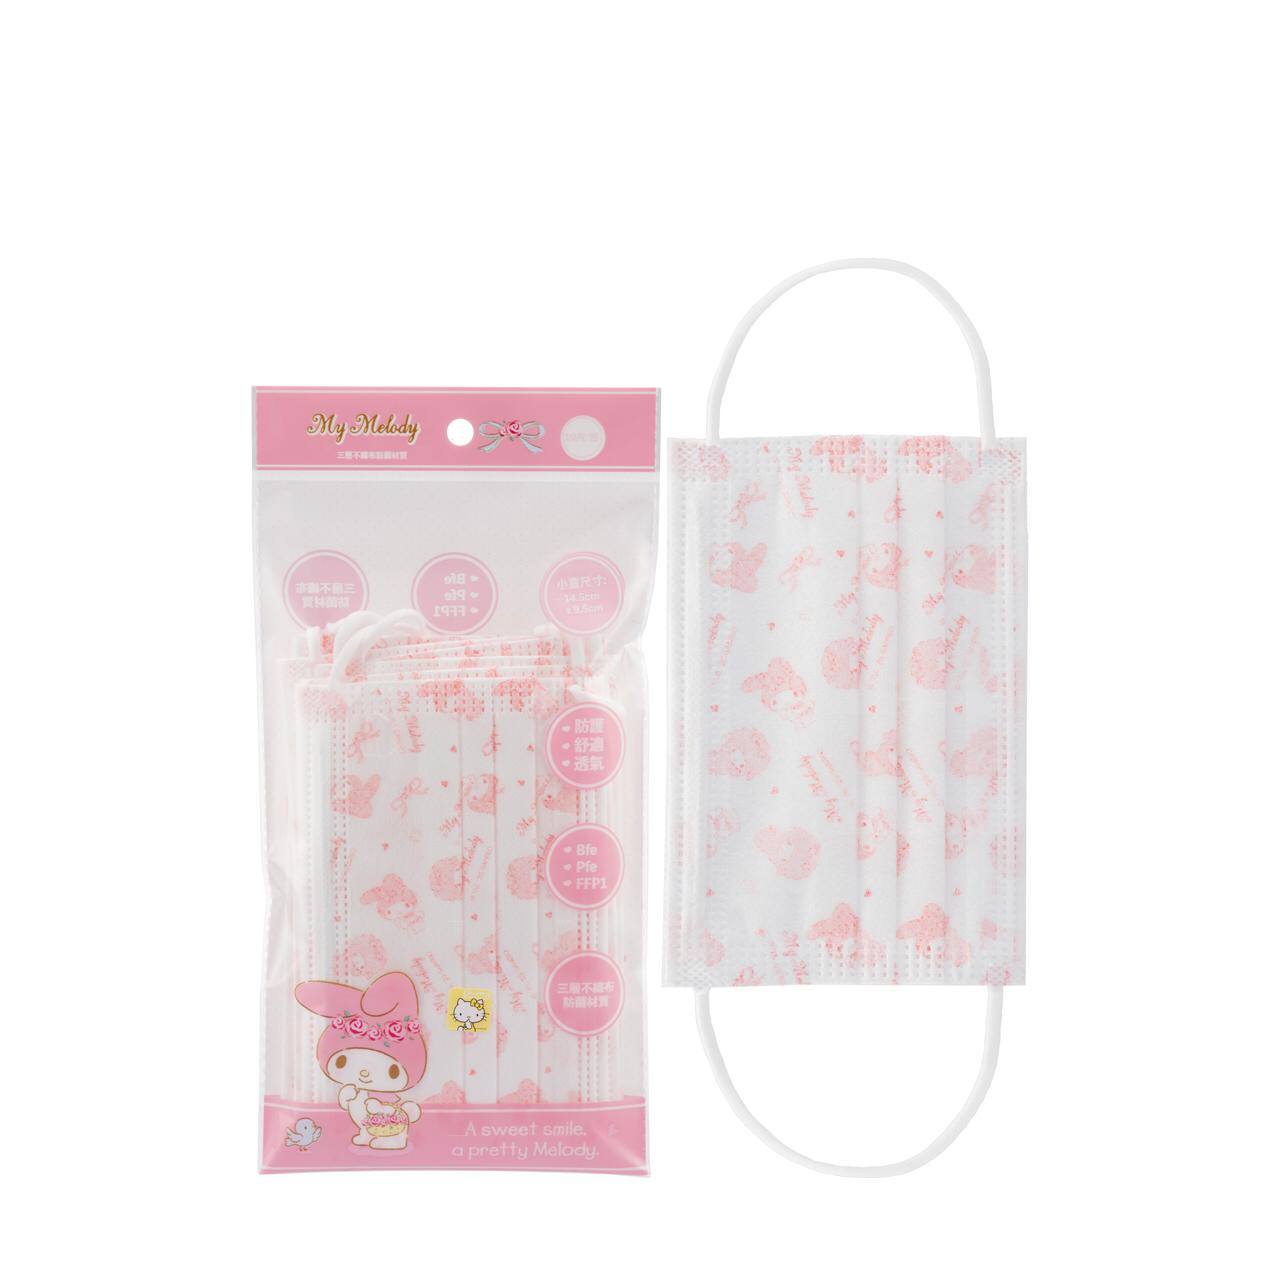 My Melody Disposable Mask Adult (10piece) Discover Health & Lifestyle Asia